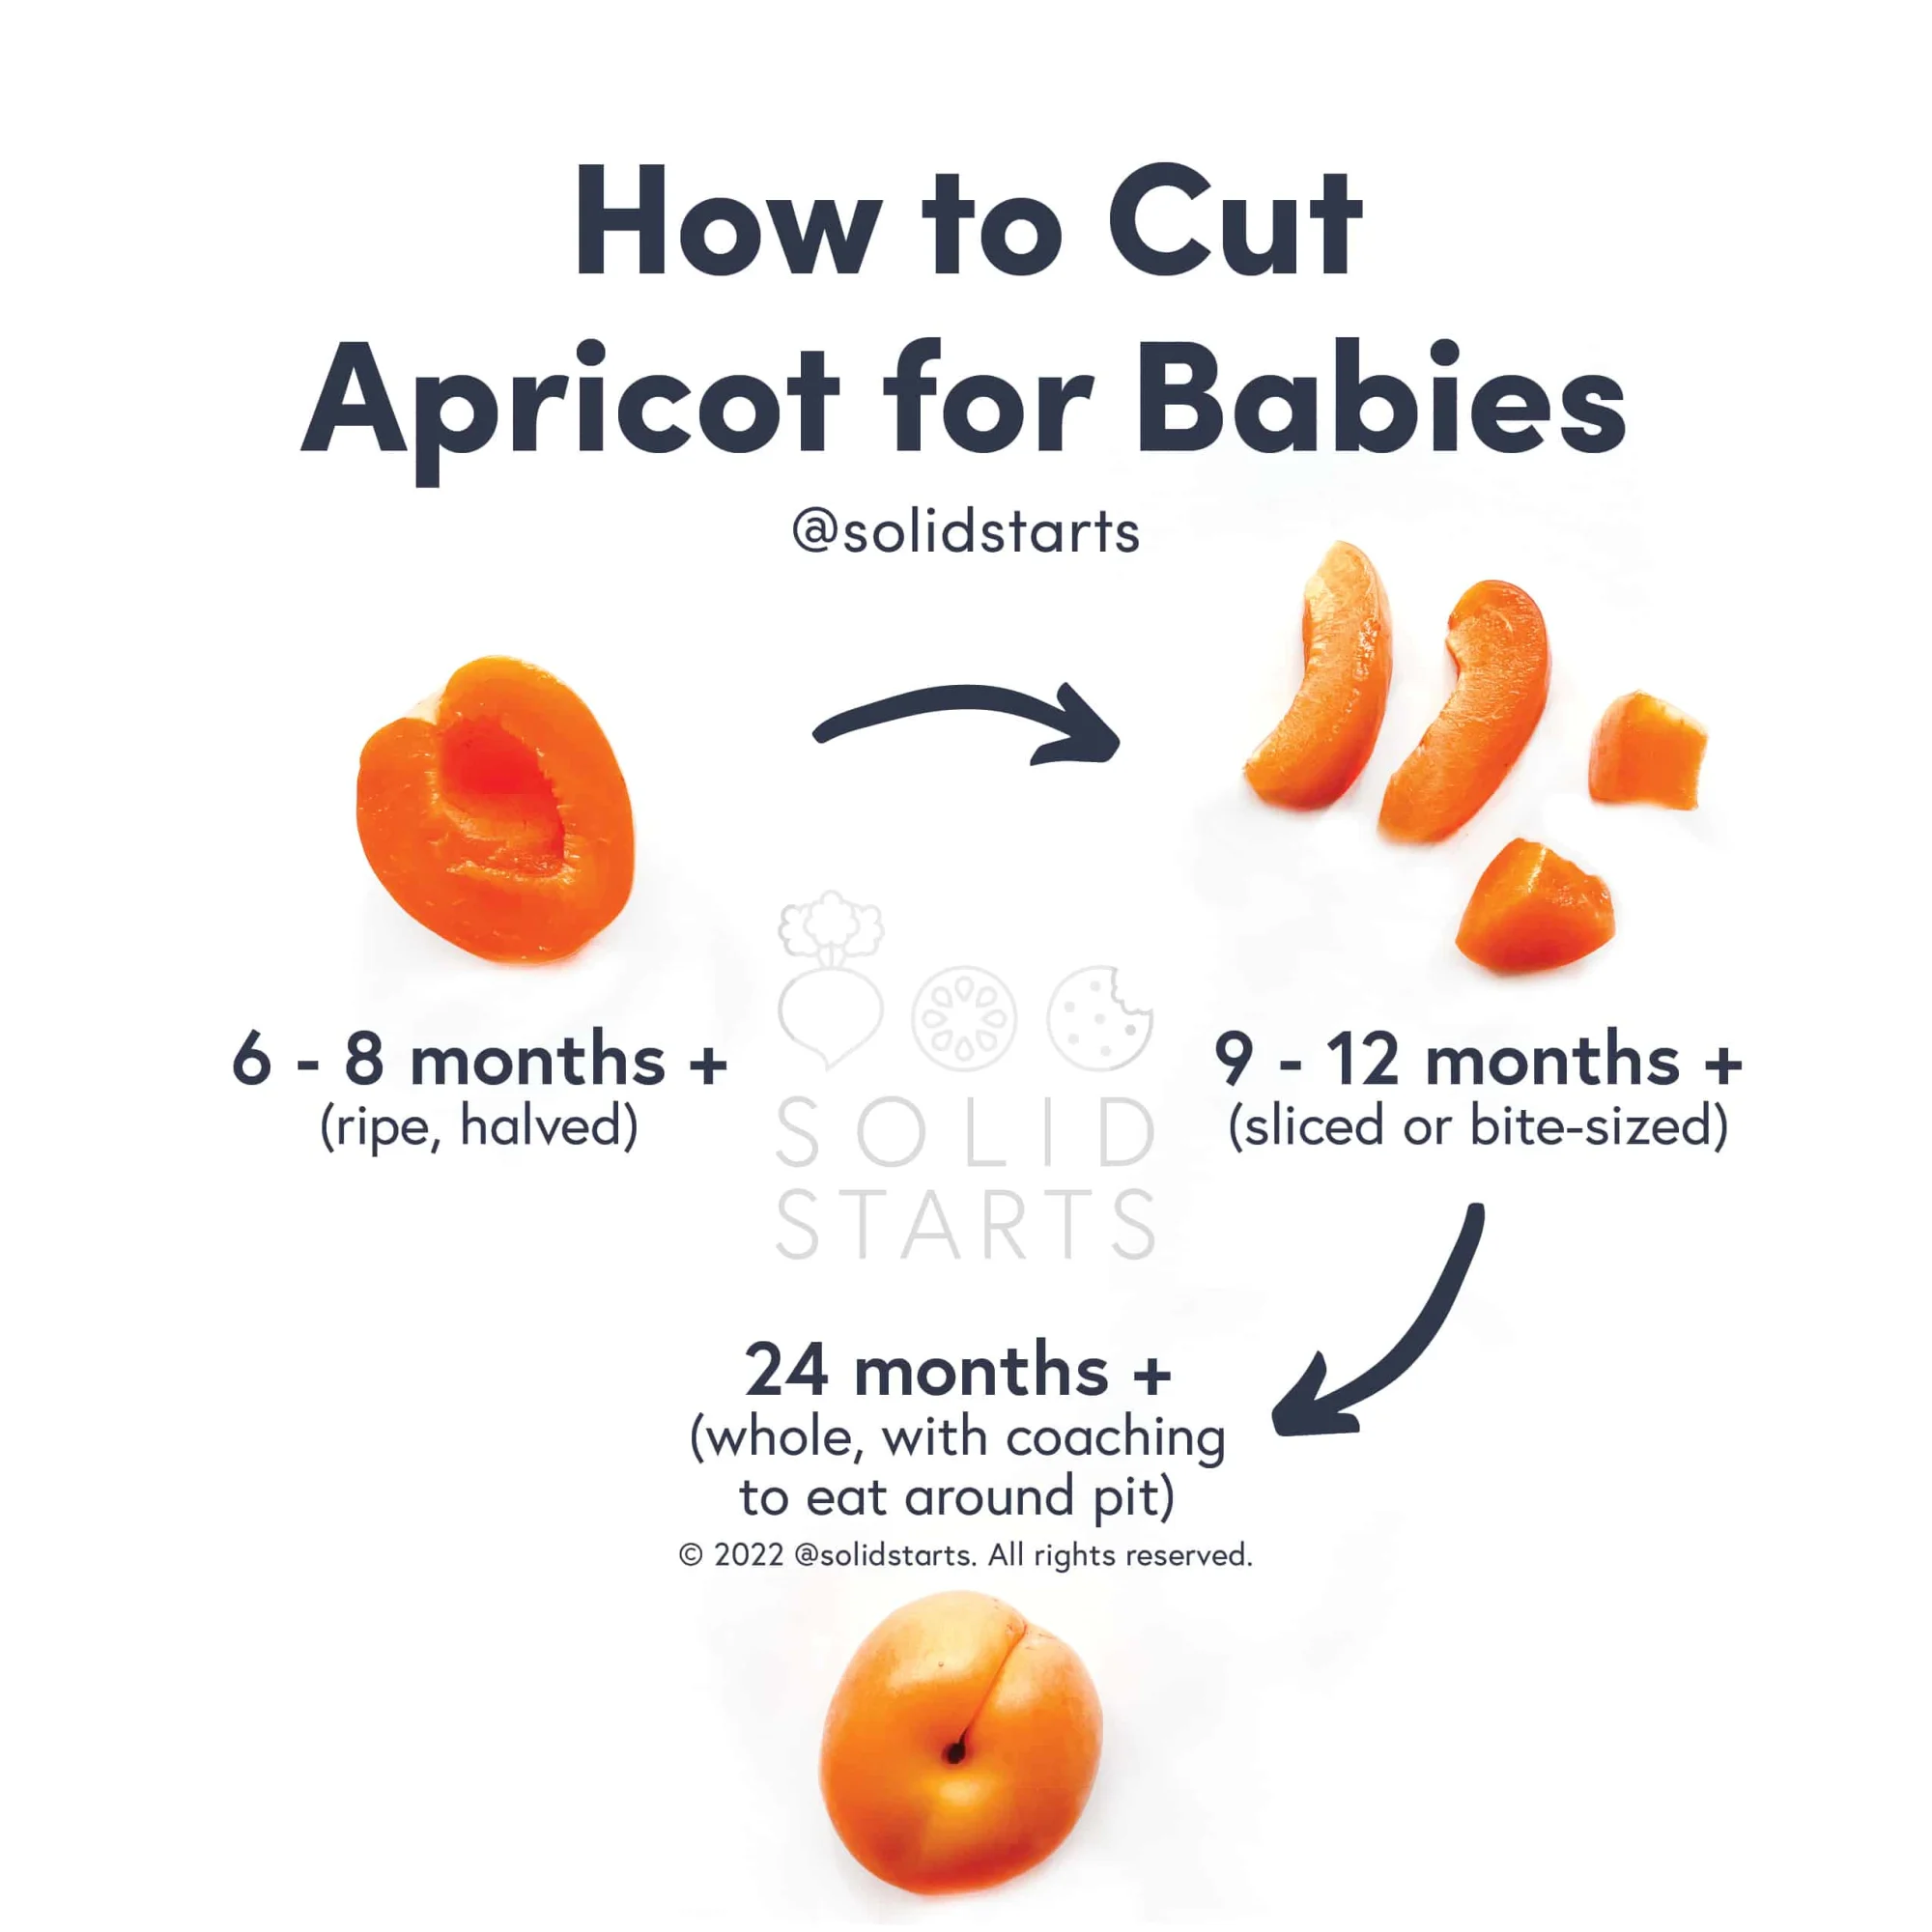 a Solid Starts infographic with the header How to Cut Apricot for Babies: ripe, pitted half for 6-8 mos+, thin slices or bite size pieces for 9-12 mos+,